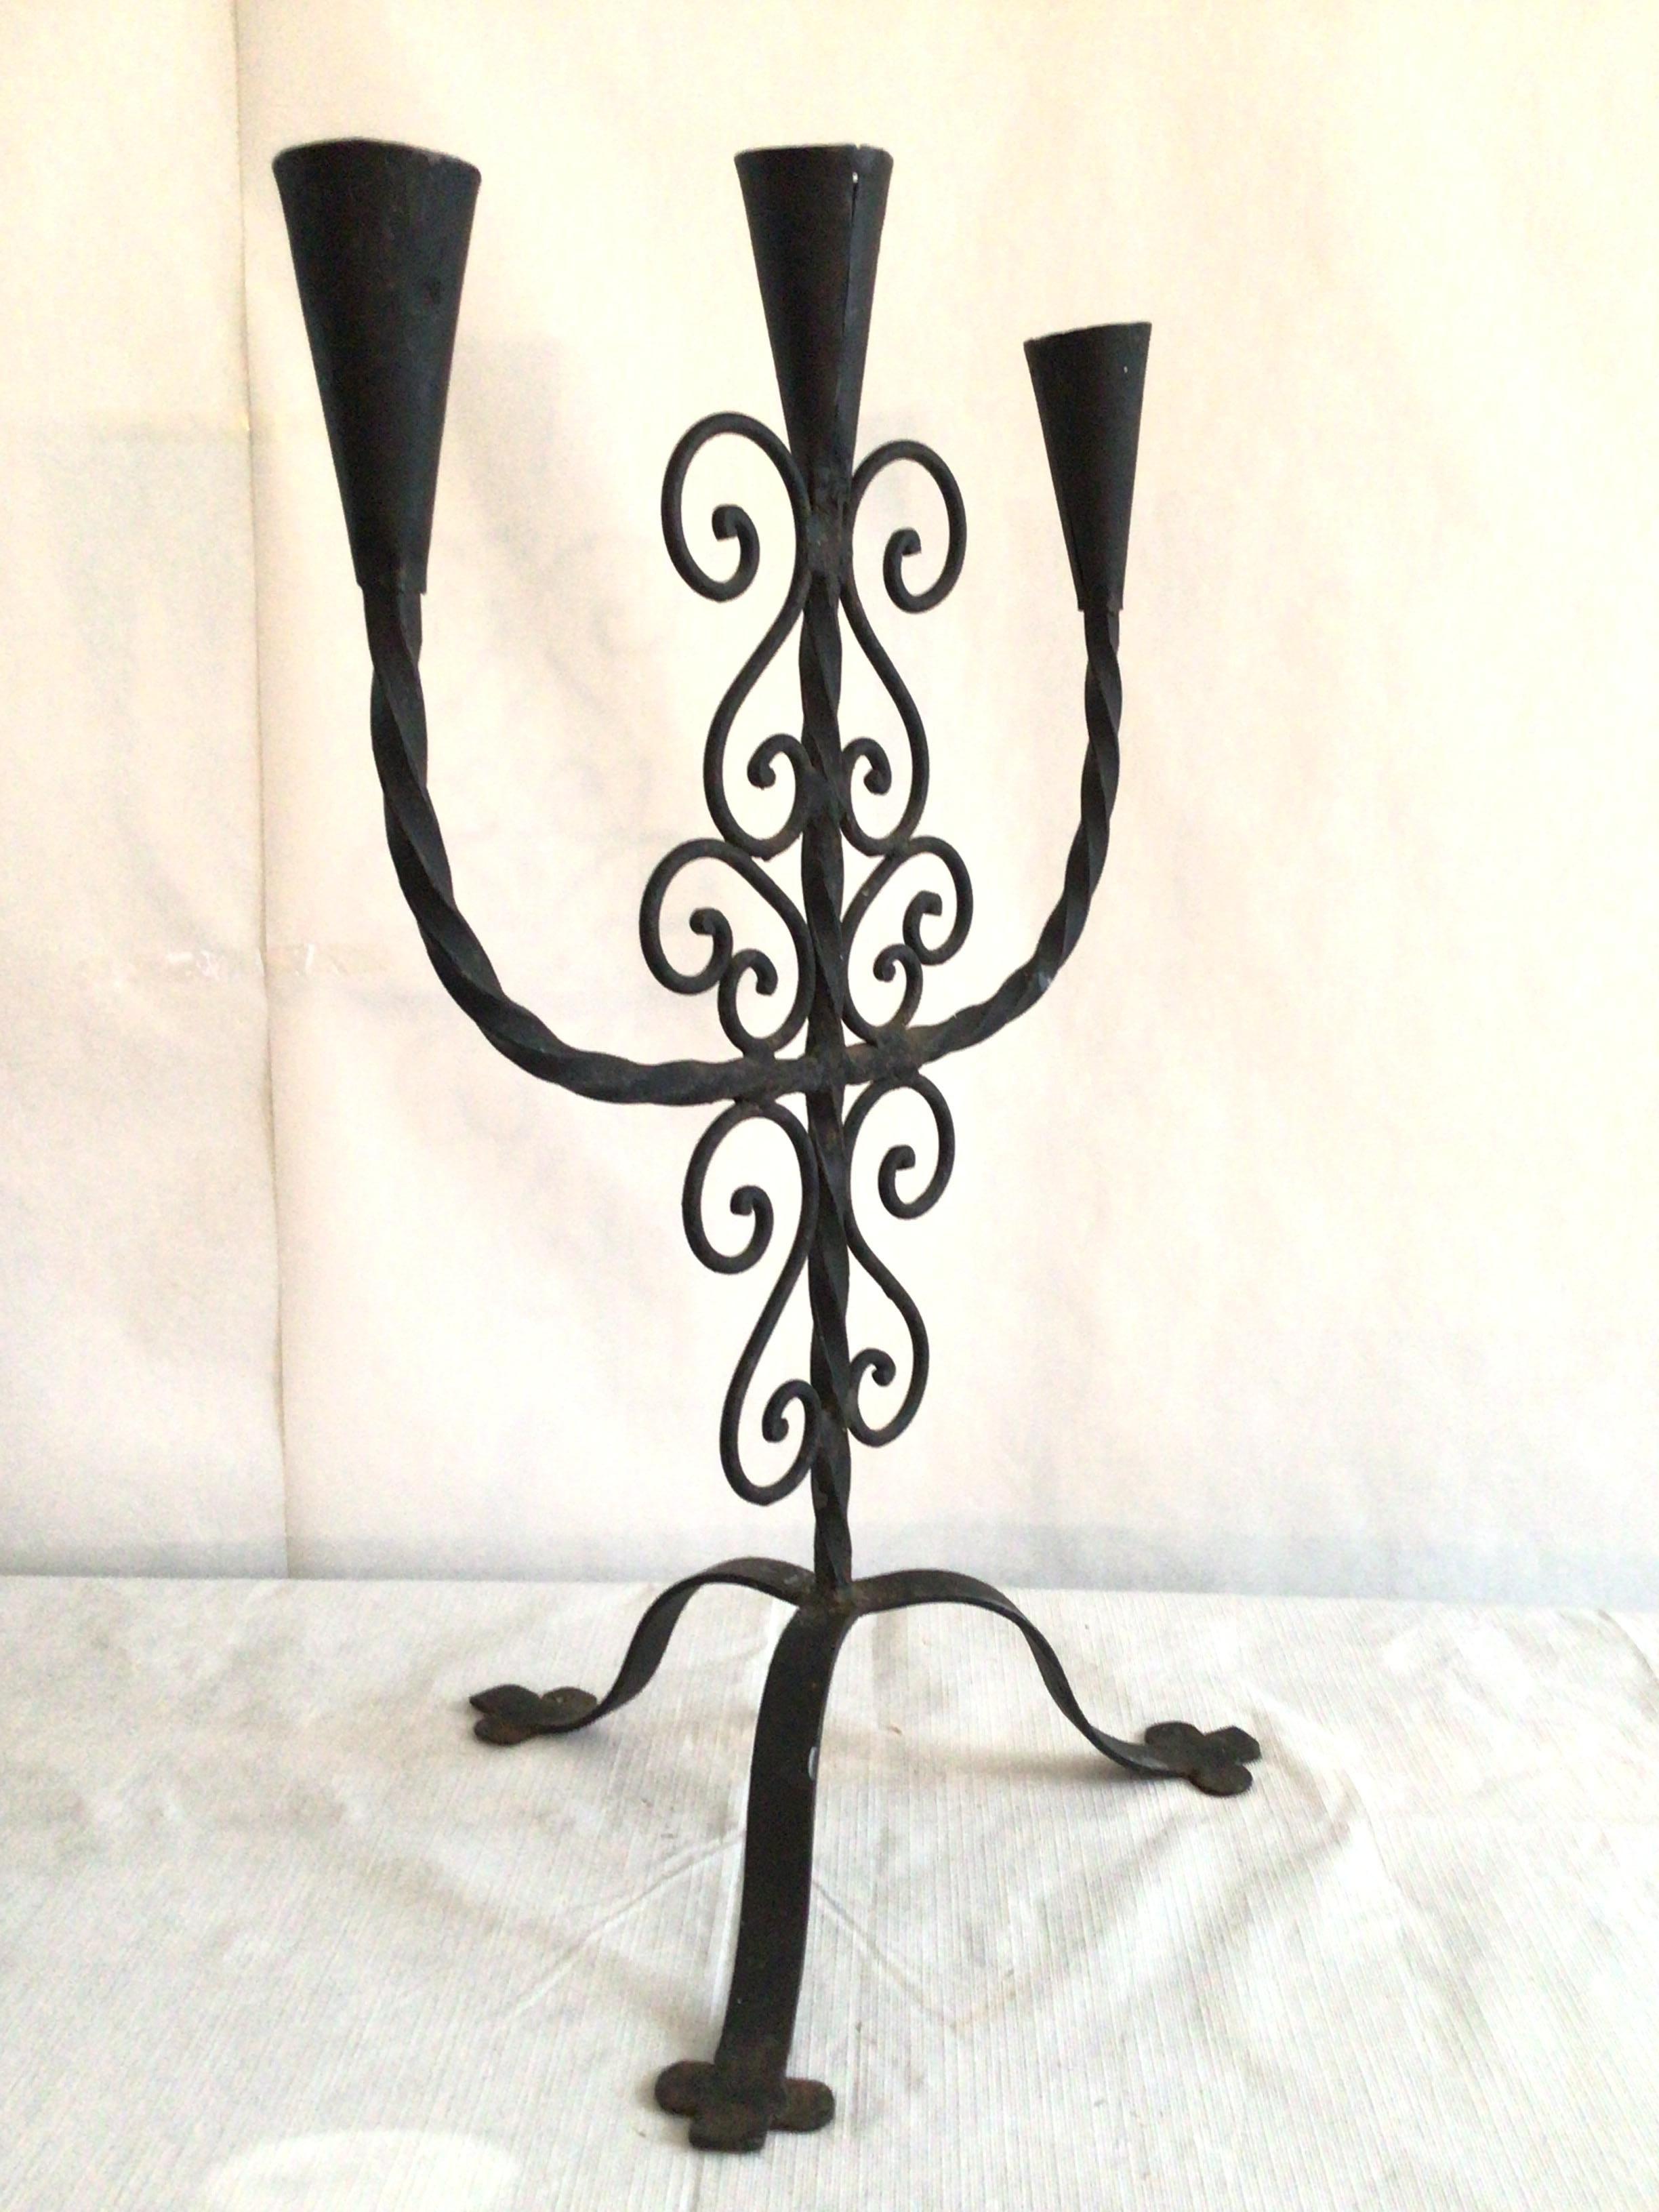 1950 Hand wrought iron candle holder - tripod base and scroll work add a nice presence for any interior setting.